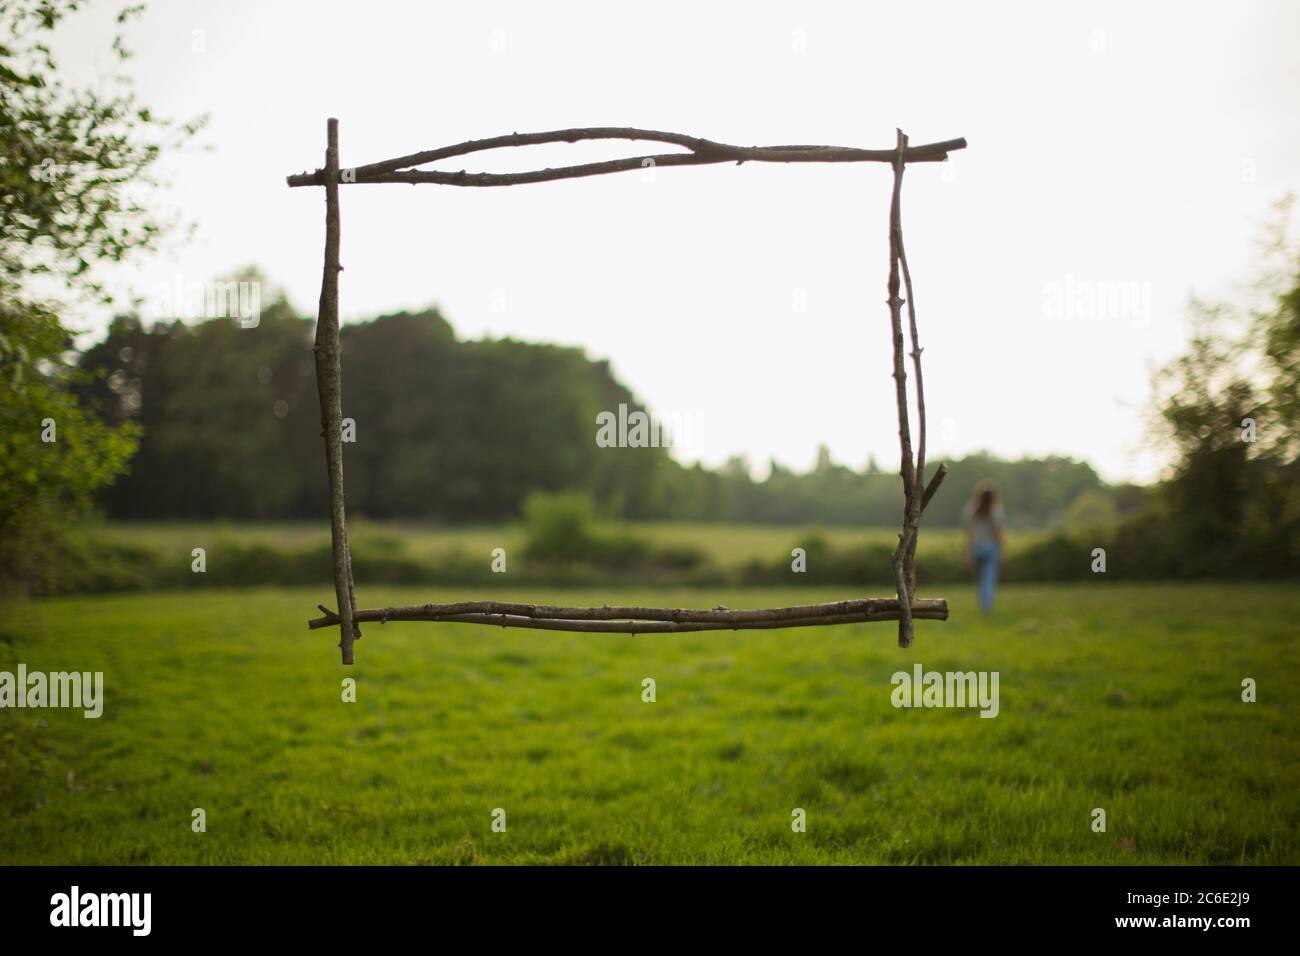 Branch frame over woman walking in idyllic grass field Stock Photo